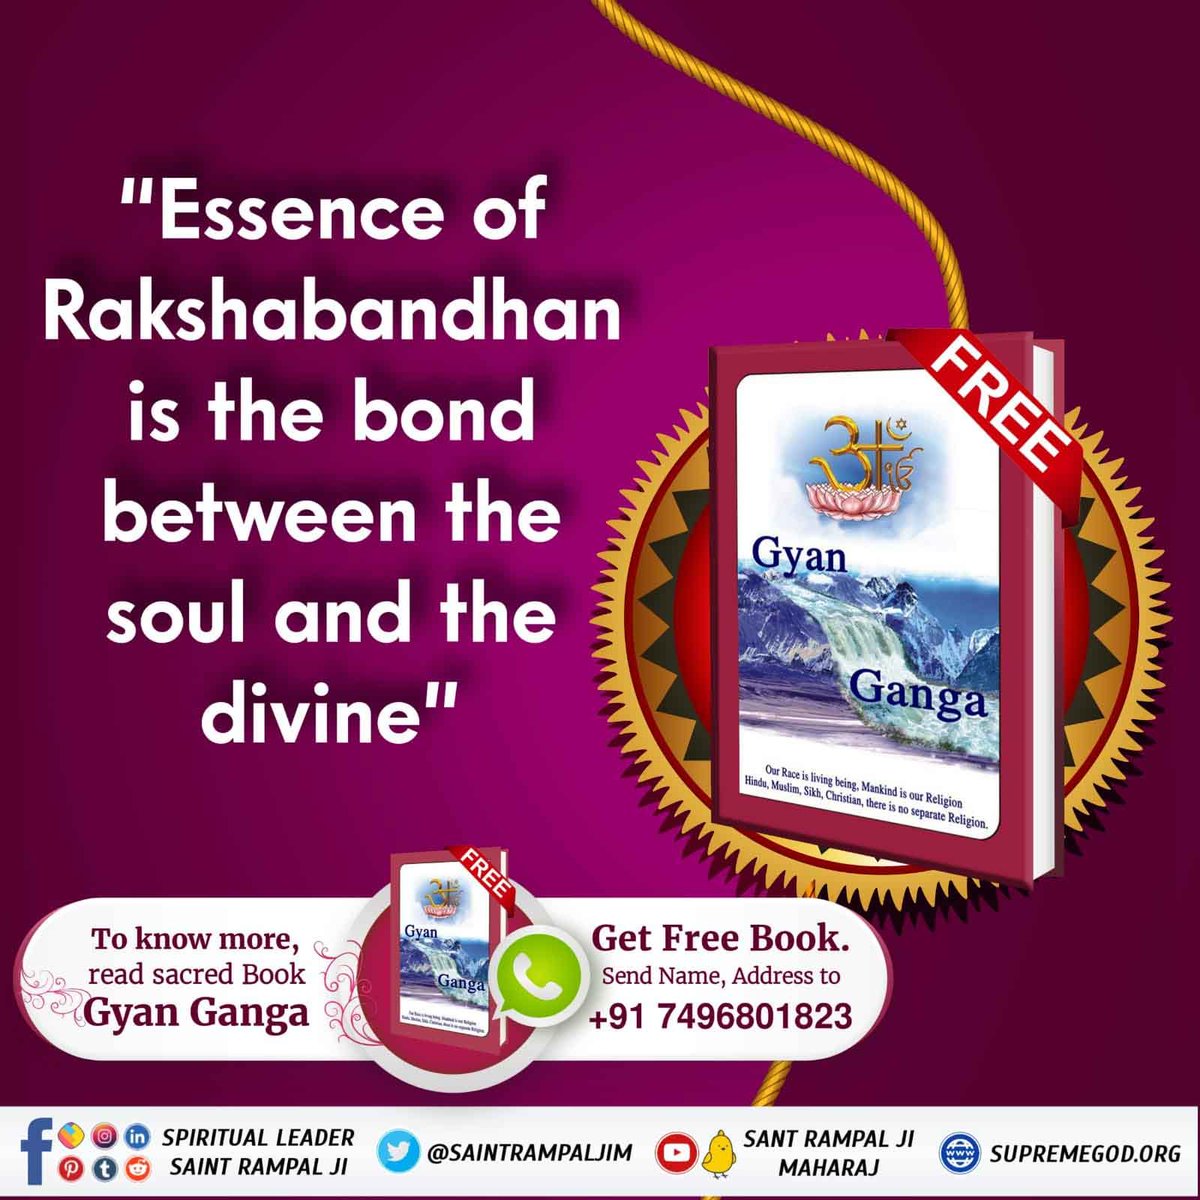 'Essence of
 Rakshabandhan 
is the bond 
between the 
 soul and the divine'
#अविनाशी_परमात्मा_कबी
To know more, read sacred Book
#GyanGanga
Get Free Book. Send Name, Address to +91 7496801823